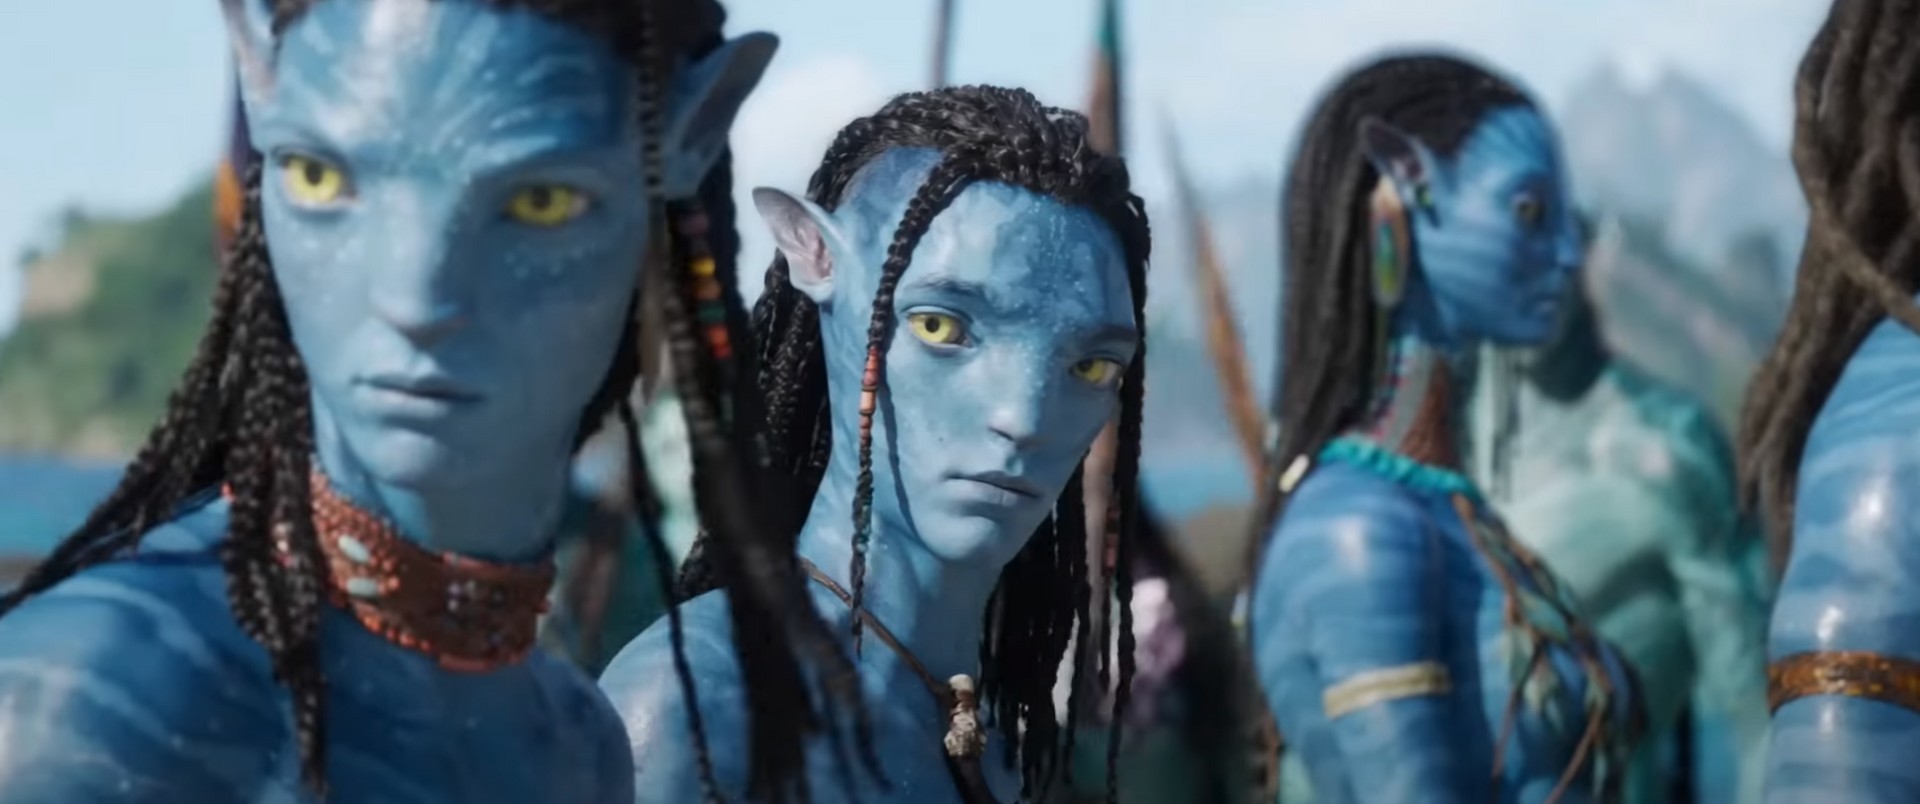 Avatar: The Water Way crashed several projectors in Japan